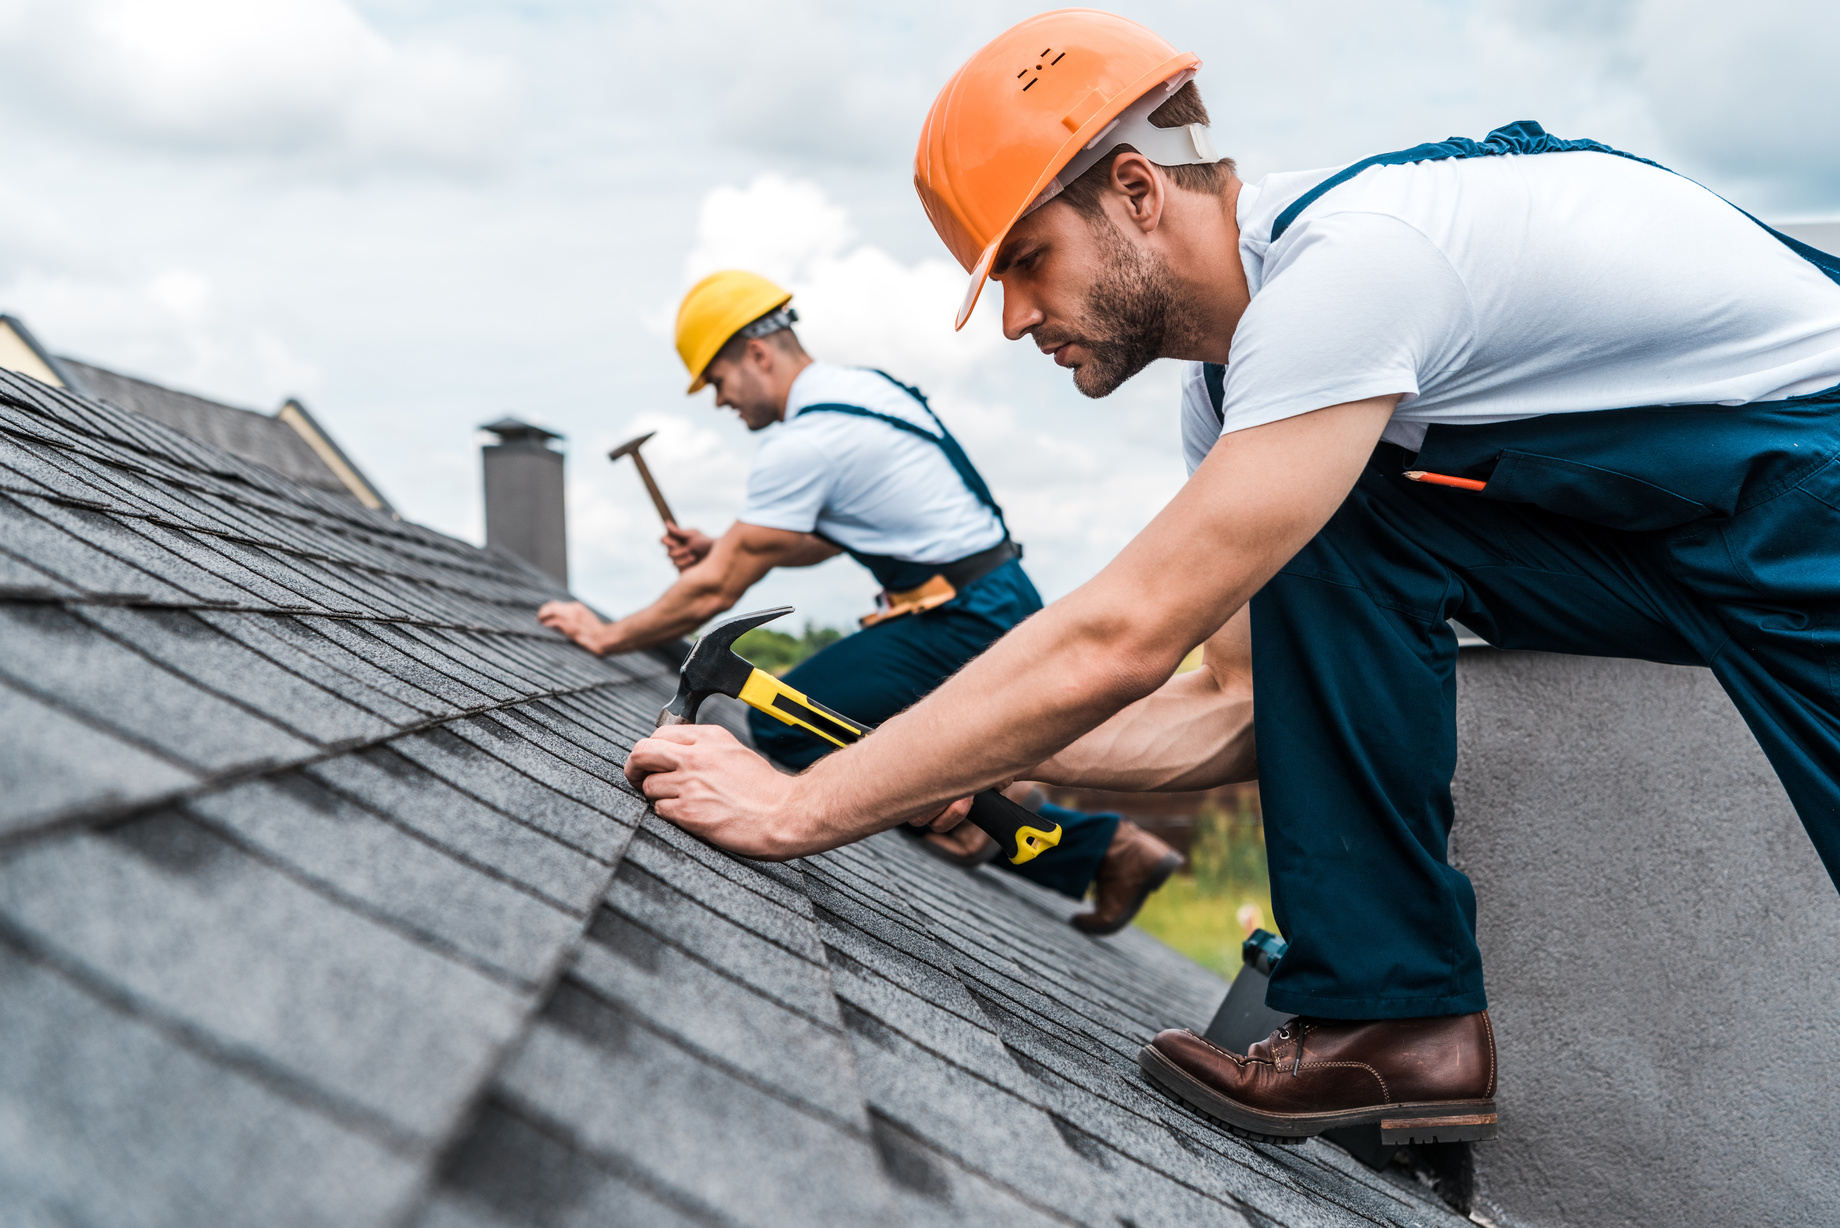 roofing experts working on residential roof